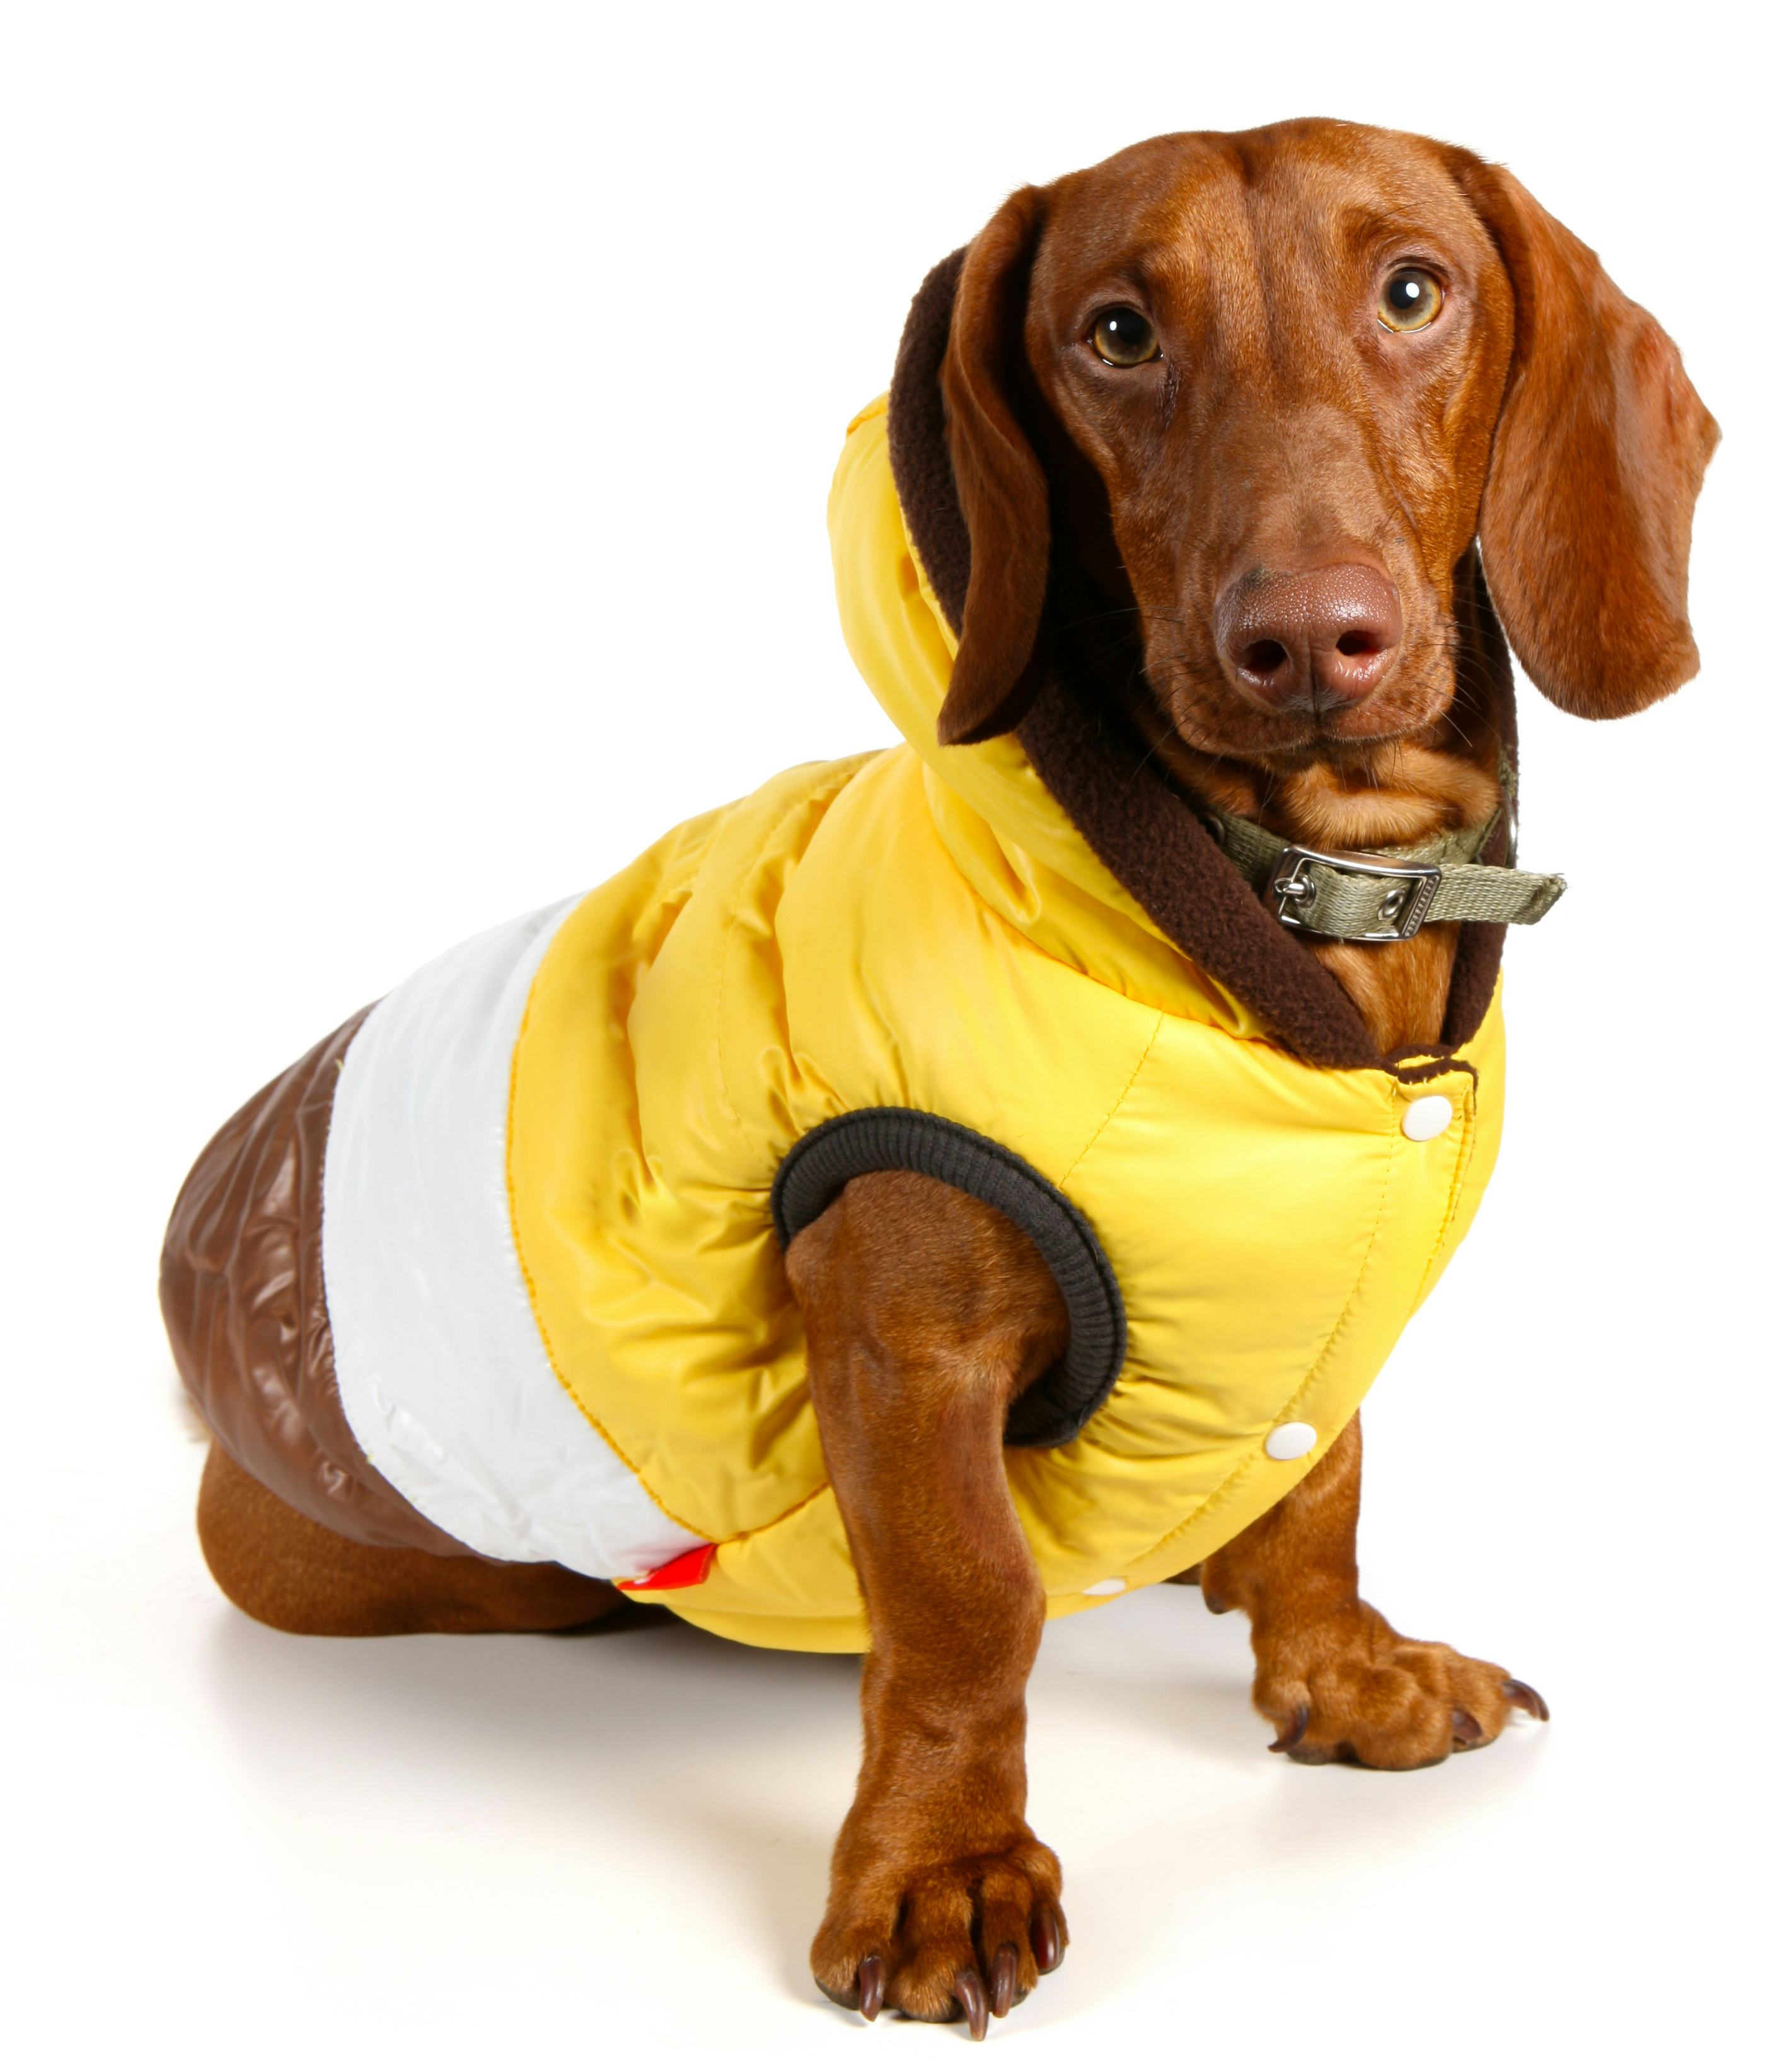 a picture of a dog wearing yellow